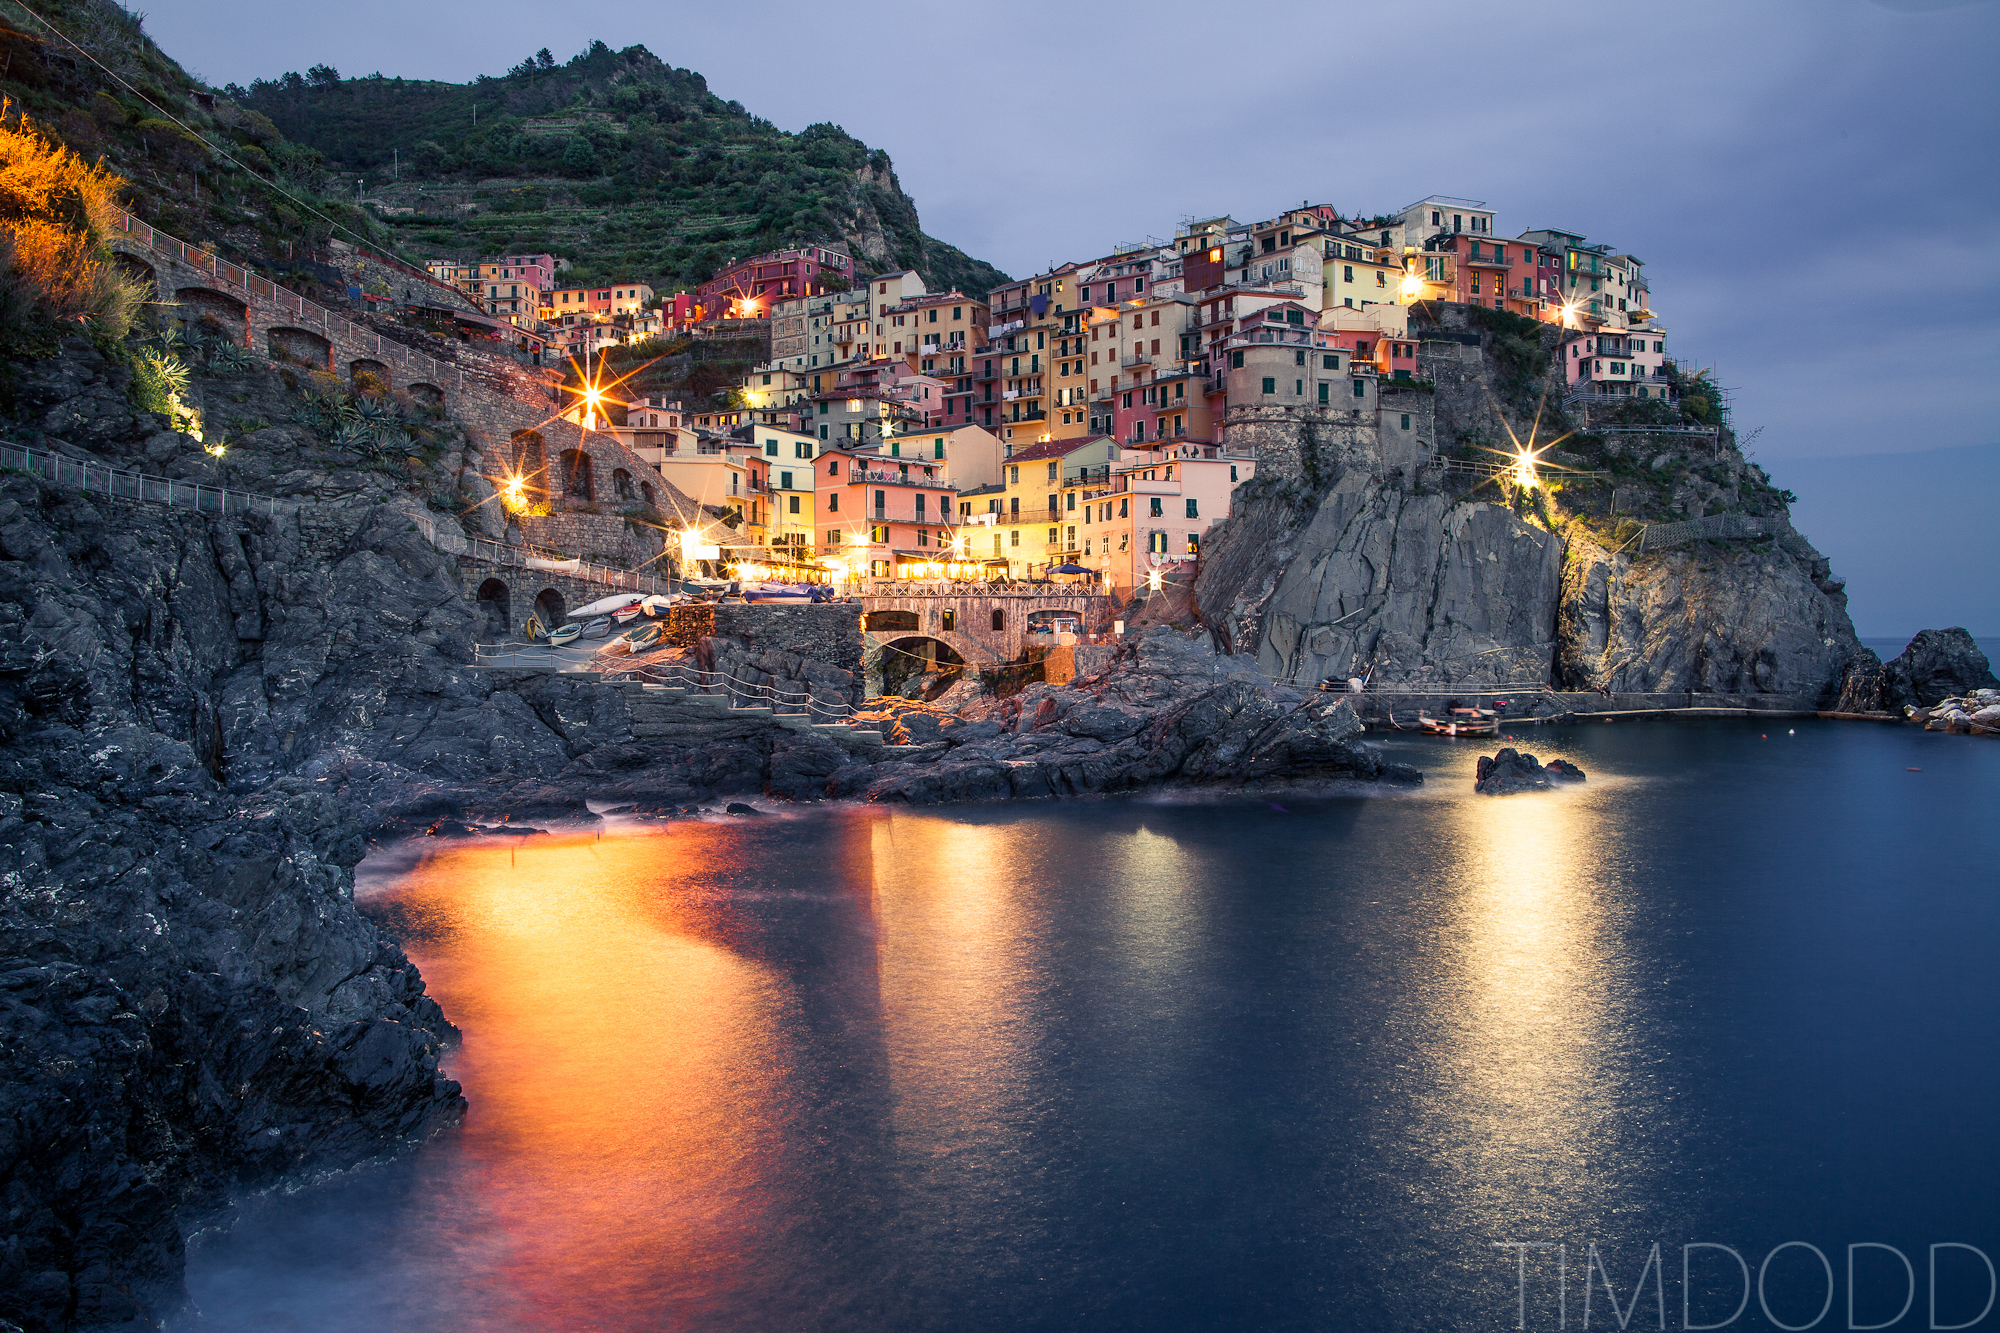 Manarola, Cinque Terre, Italy, Tim Dodd Photography, Cedar Falls, Iowa 2 Travel to Europe for cheap, top 10 things to see in Europe, must see, photographers guide, photographs, best pictures,